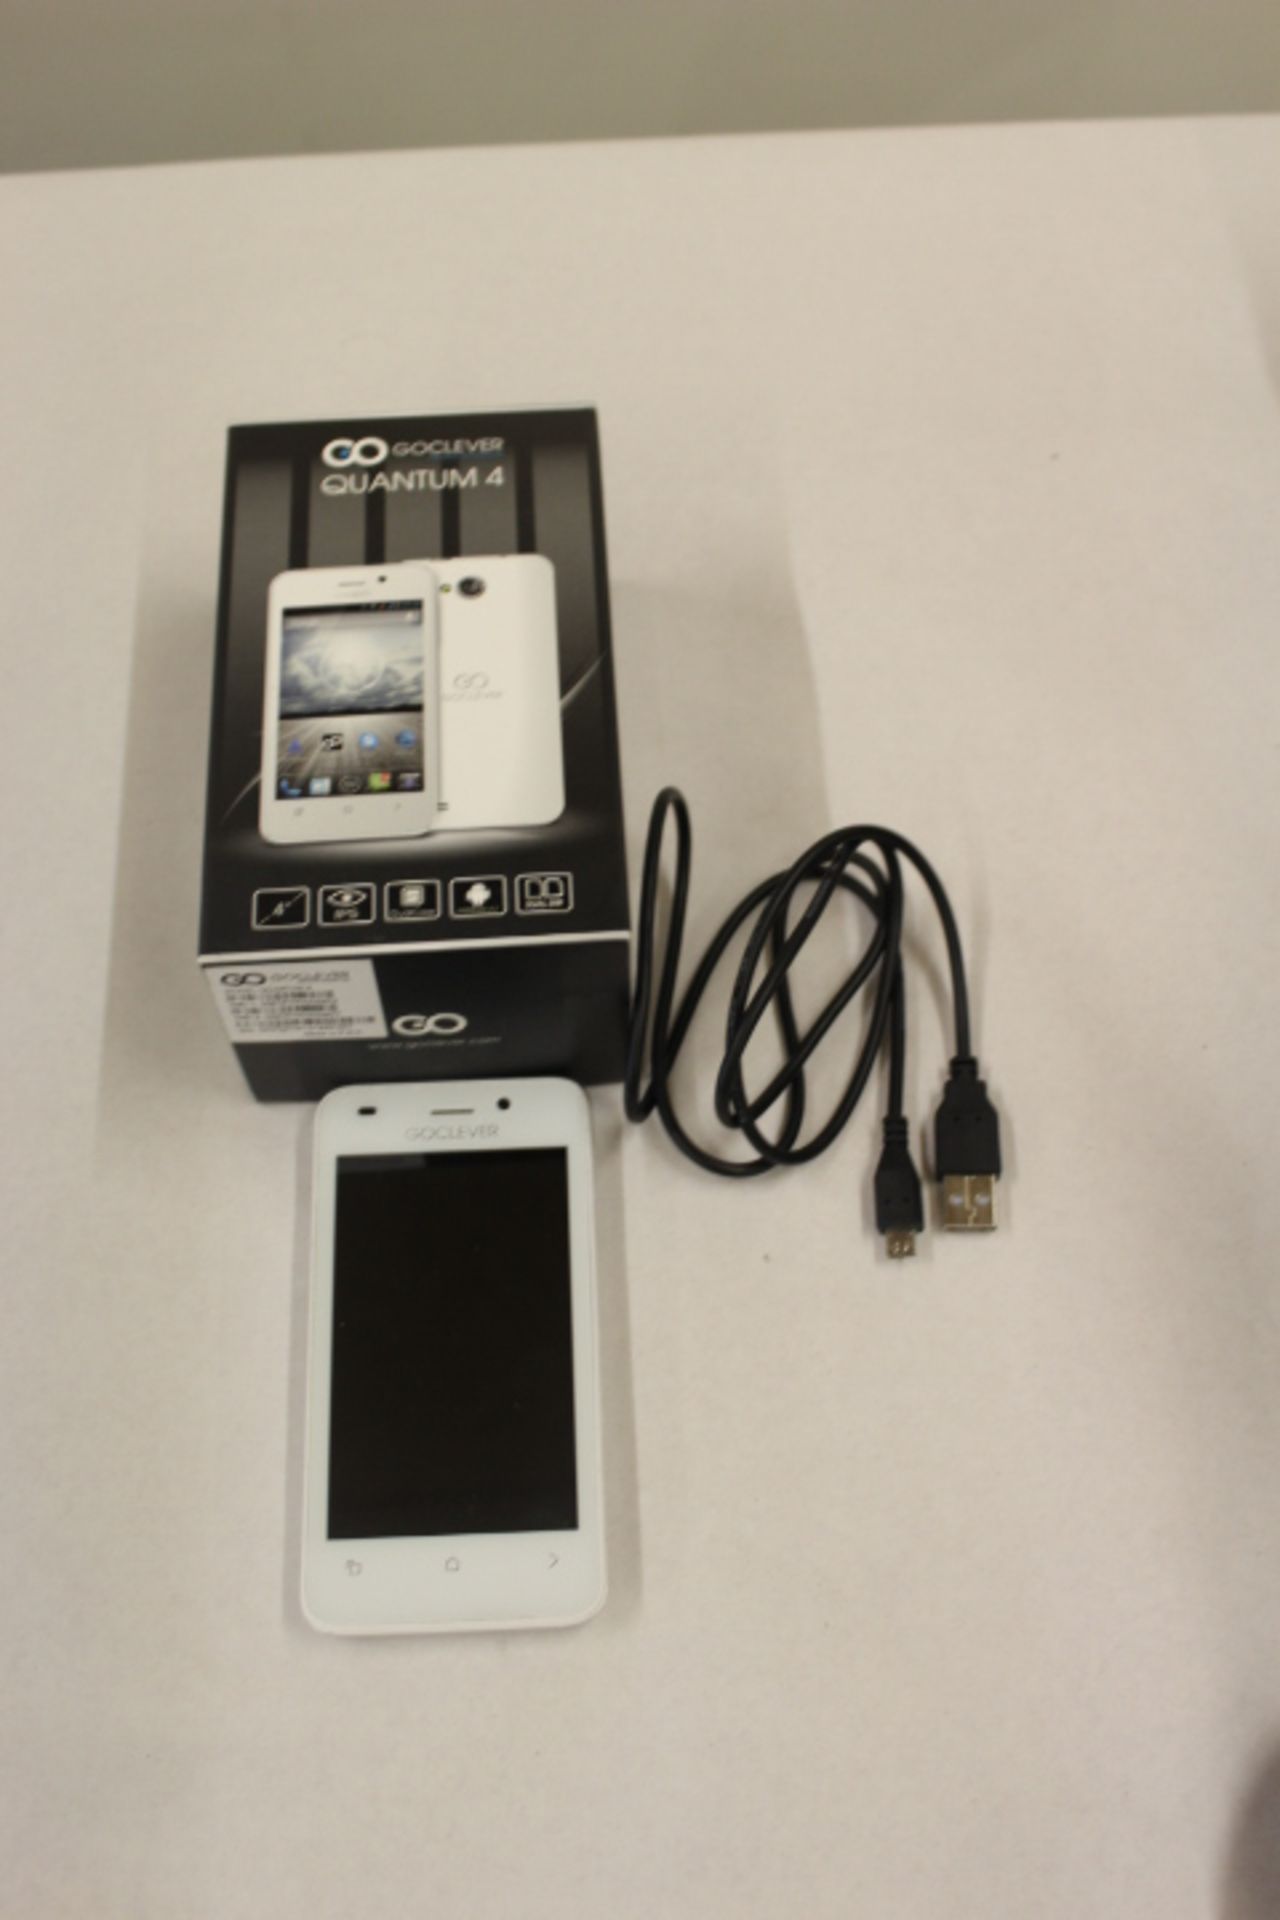 V GOCLEVER Quantum 4 4 IPS Android Dual Core A9 Dual Sim 2 Cameras BT White RRP £129 - Item Is A